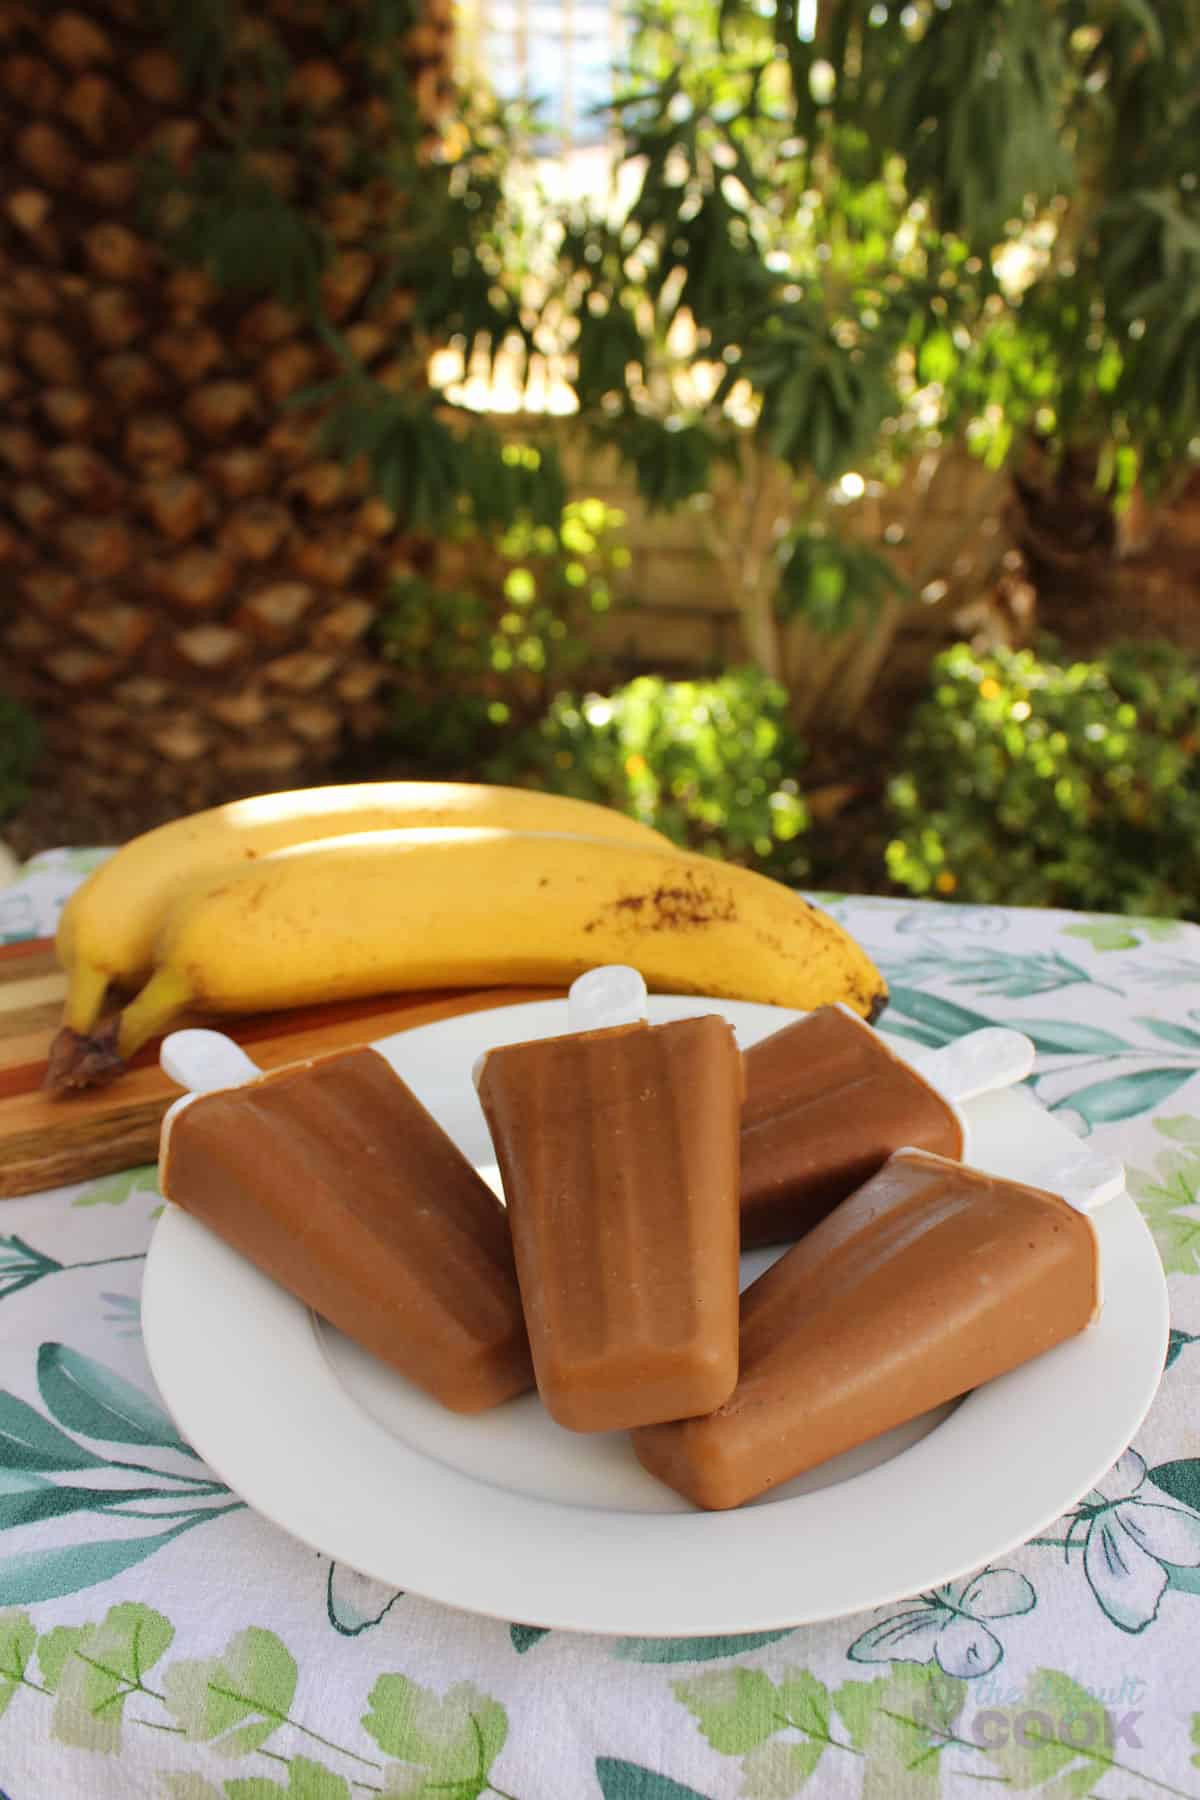 A plate of chocolate peanut butter banana popsicles outside with bananas behind it.